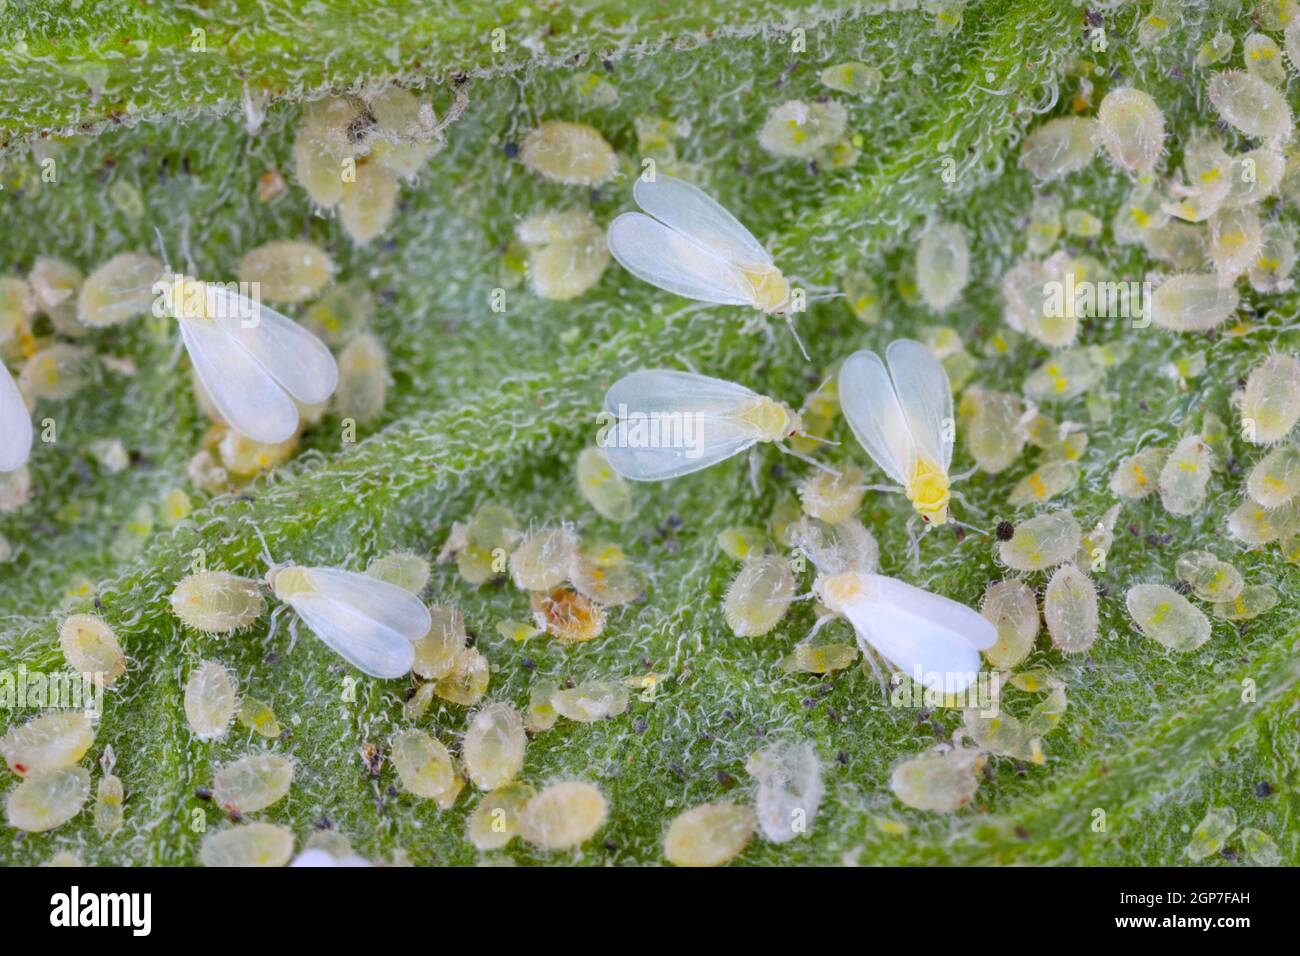 Adults, larvae and pupae of Glasshouse whitefly (Trialeurodes vaporariorum) on the underside of tomato leaves. Stock Photo